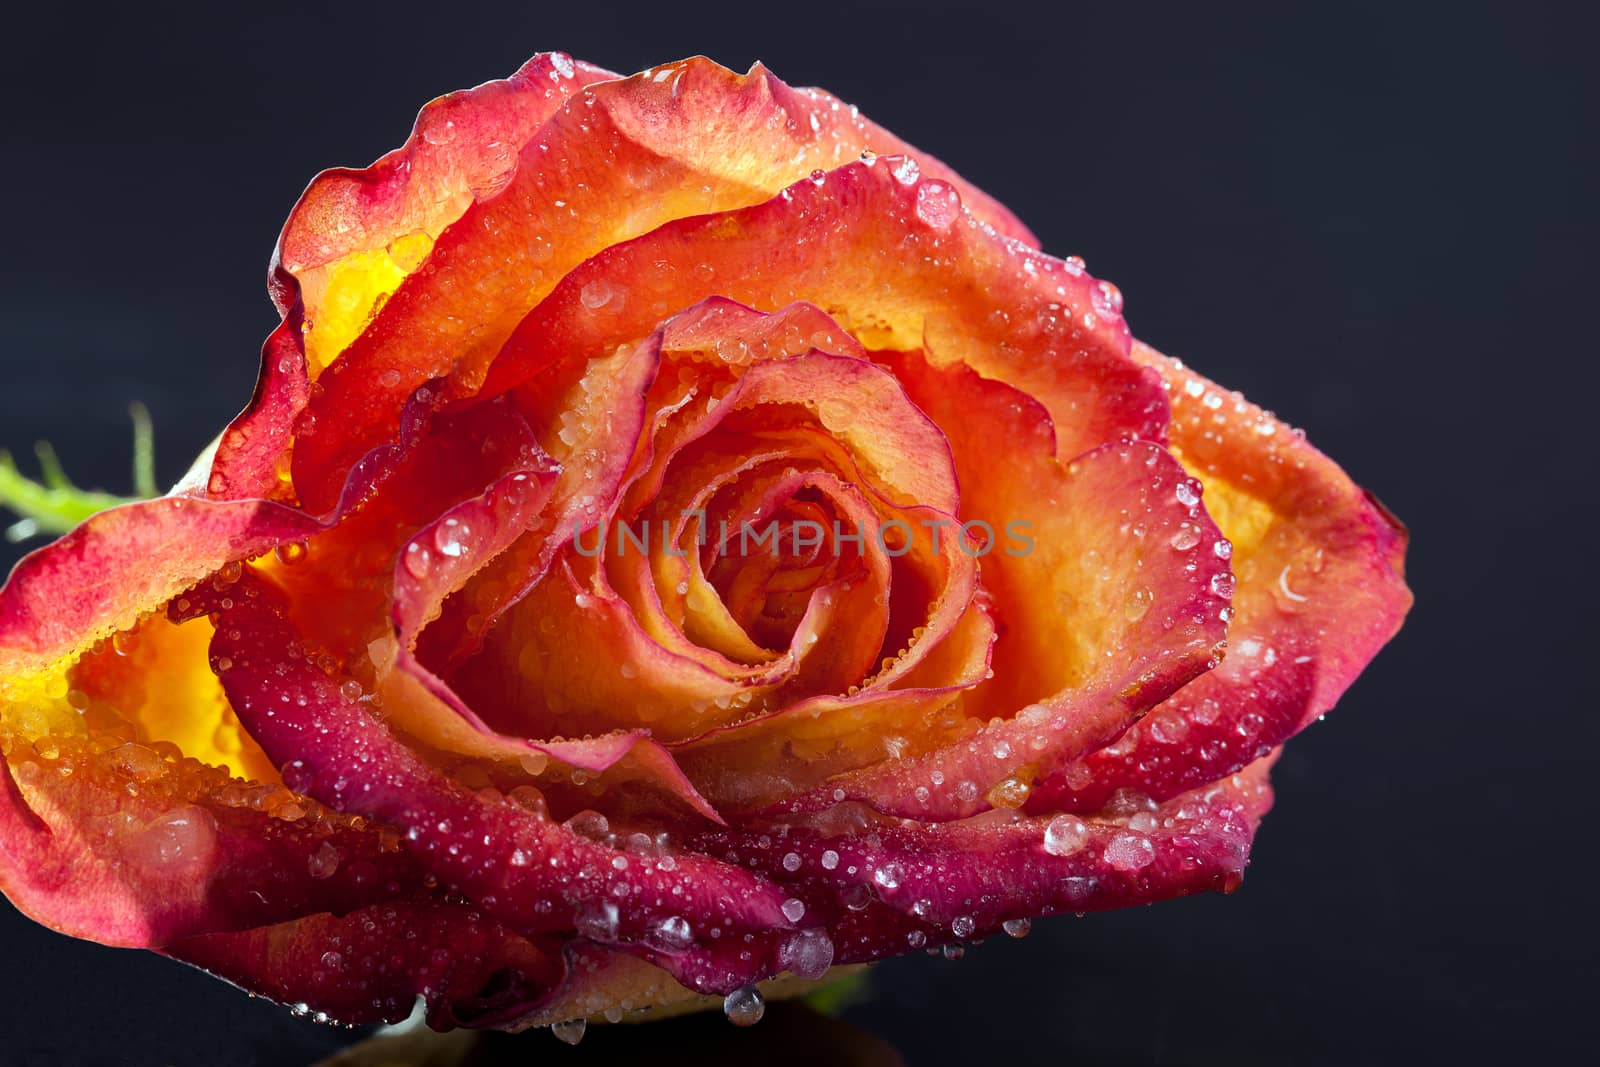 single frozen flower of rose isolated on a black background - macro